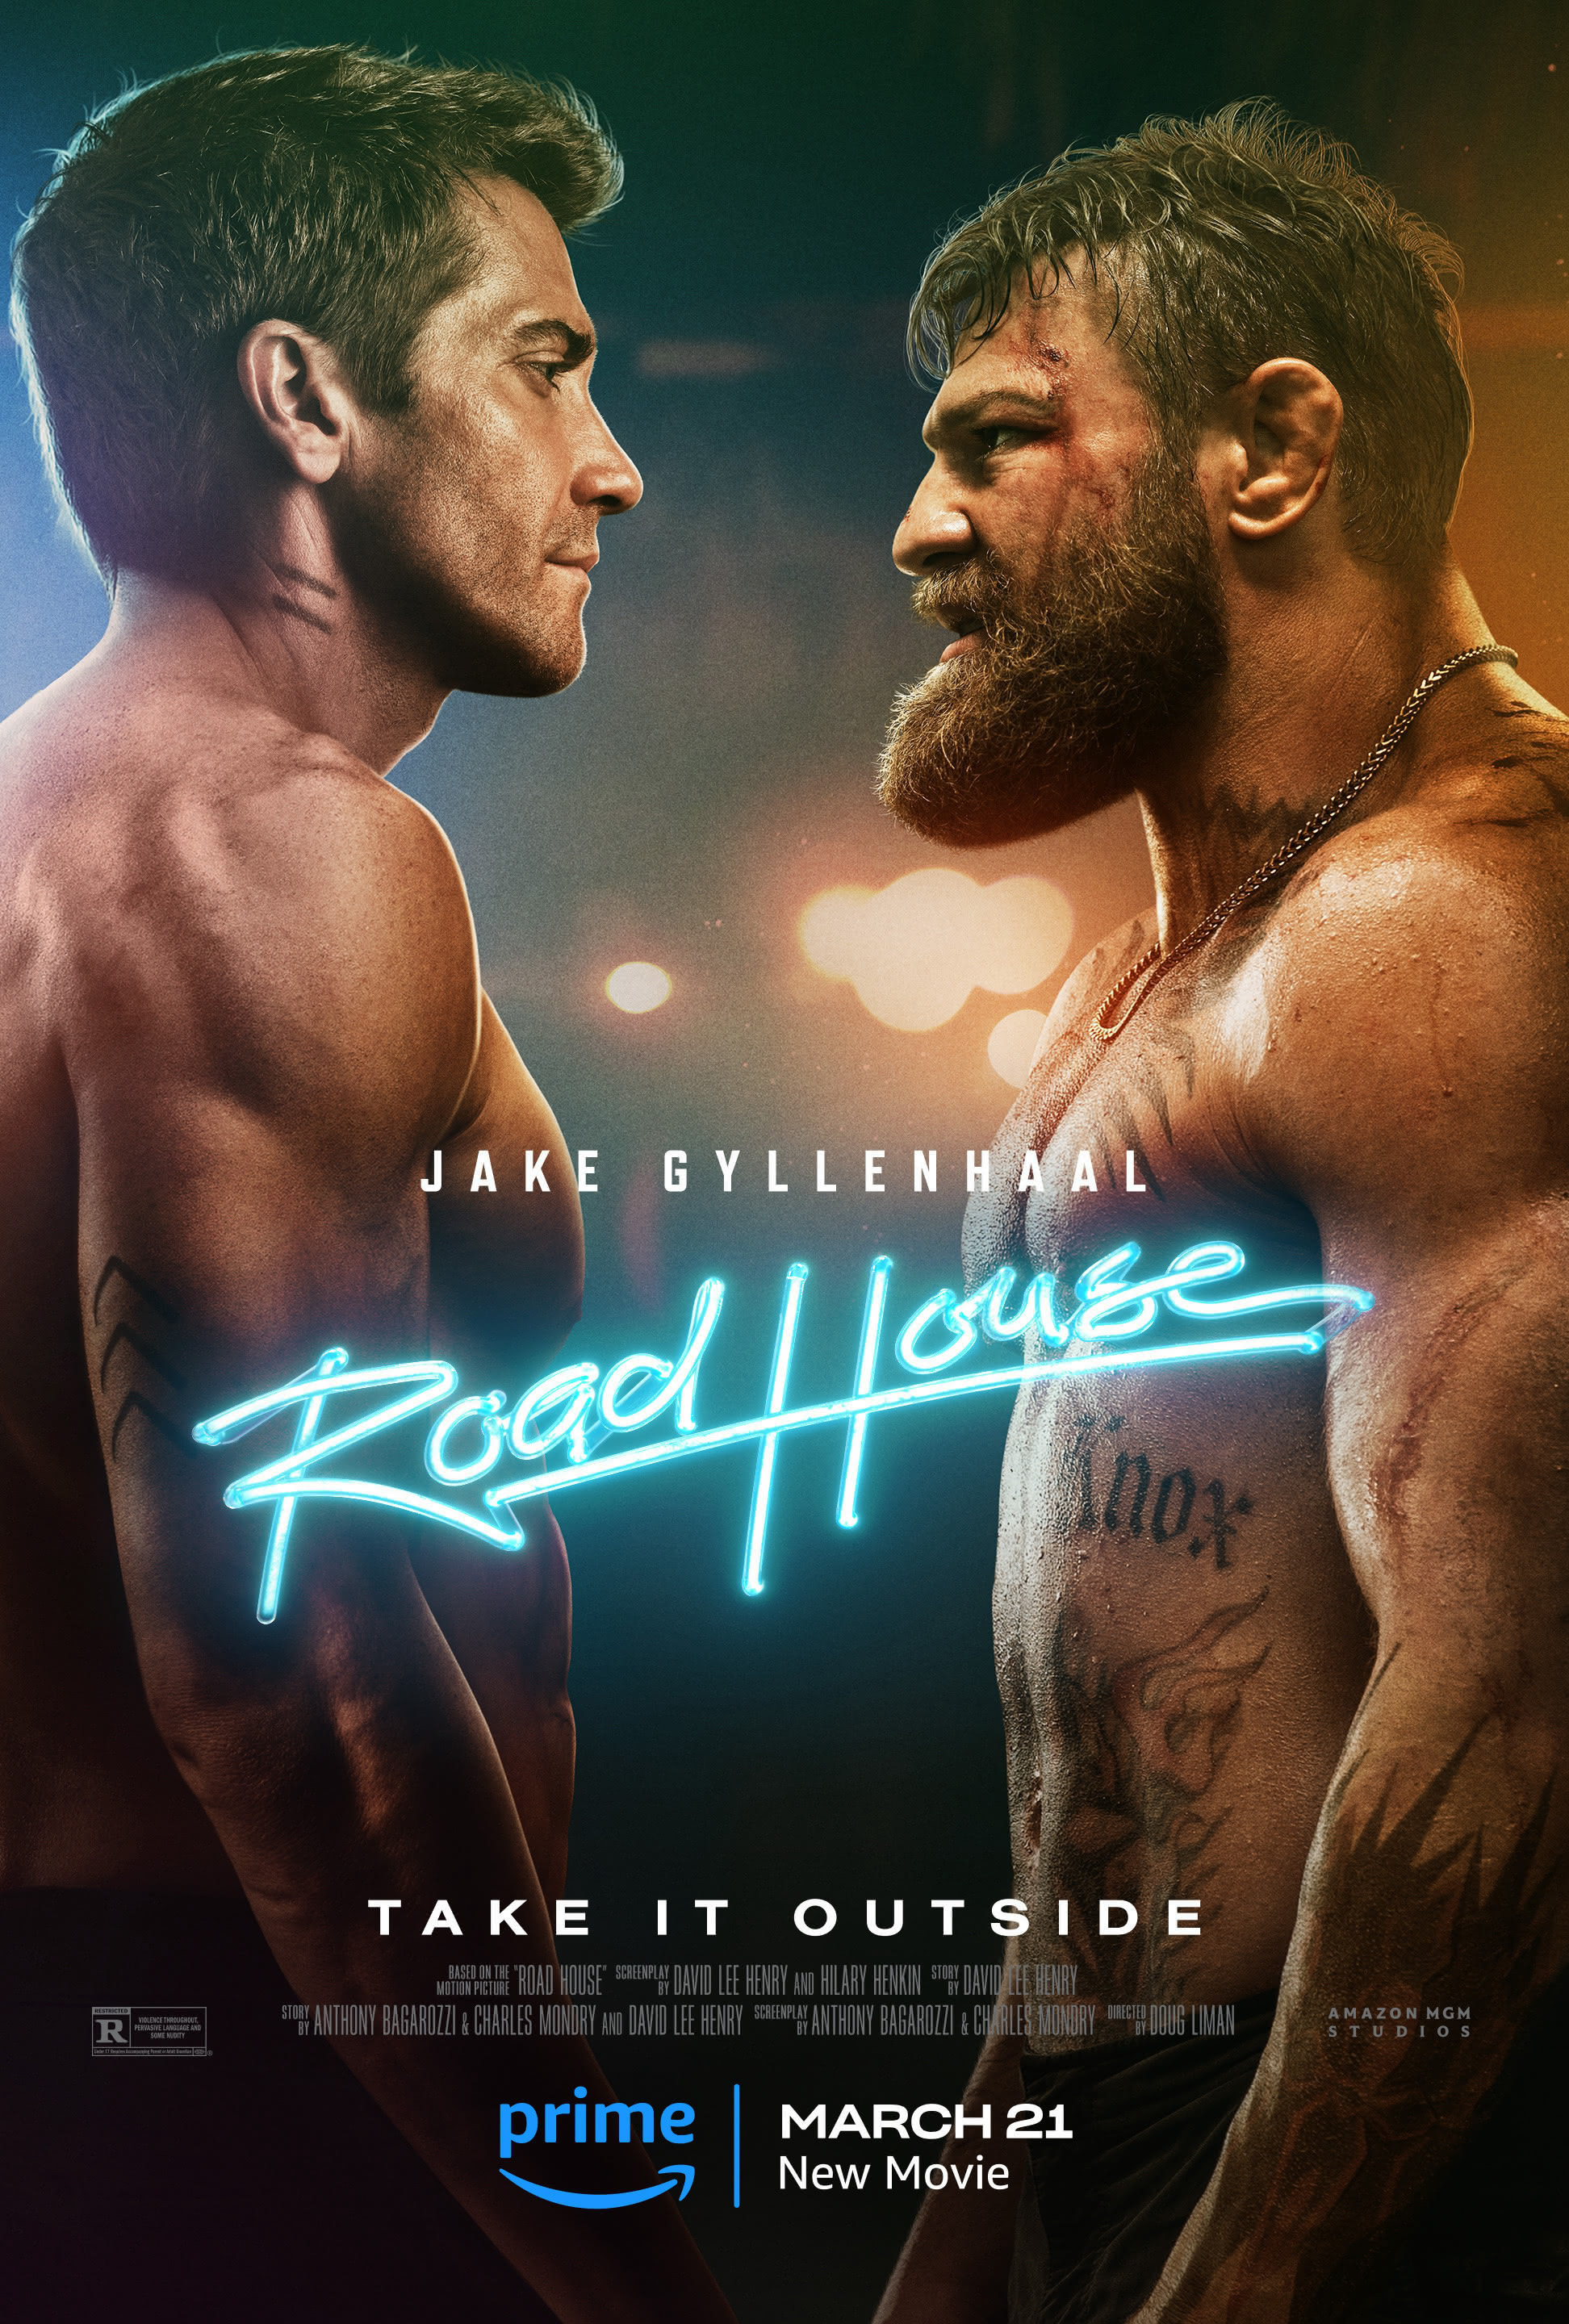 Road House (2024) FlickDirect